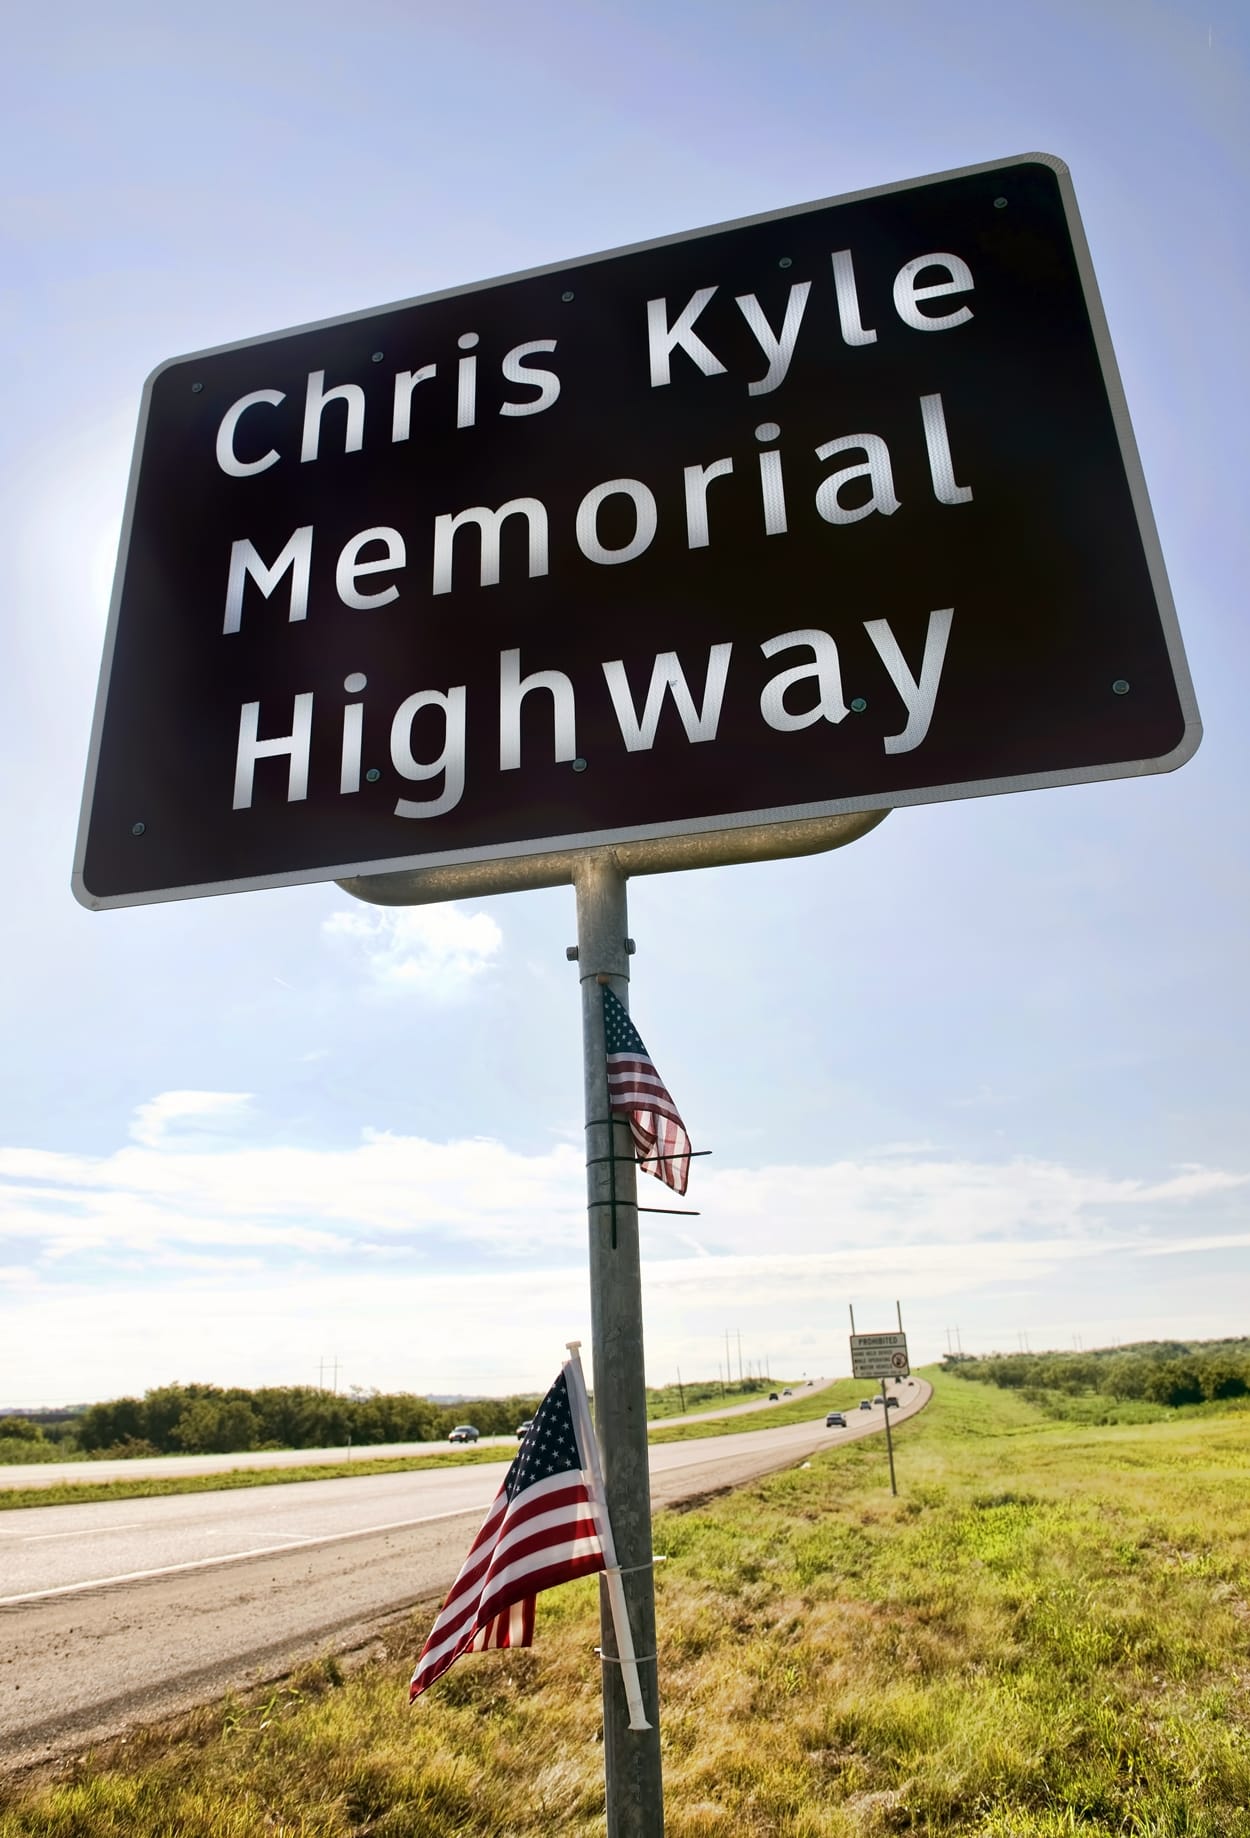 The Chris Kyle Memorial Highway in Texas is a tribute to one of the most lethal snipers in American history